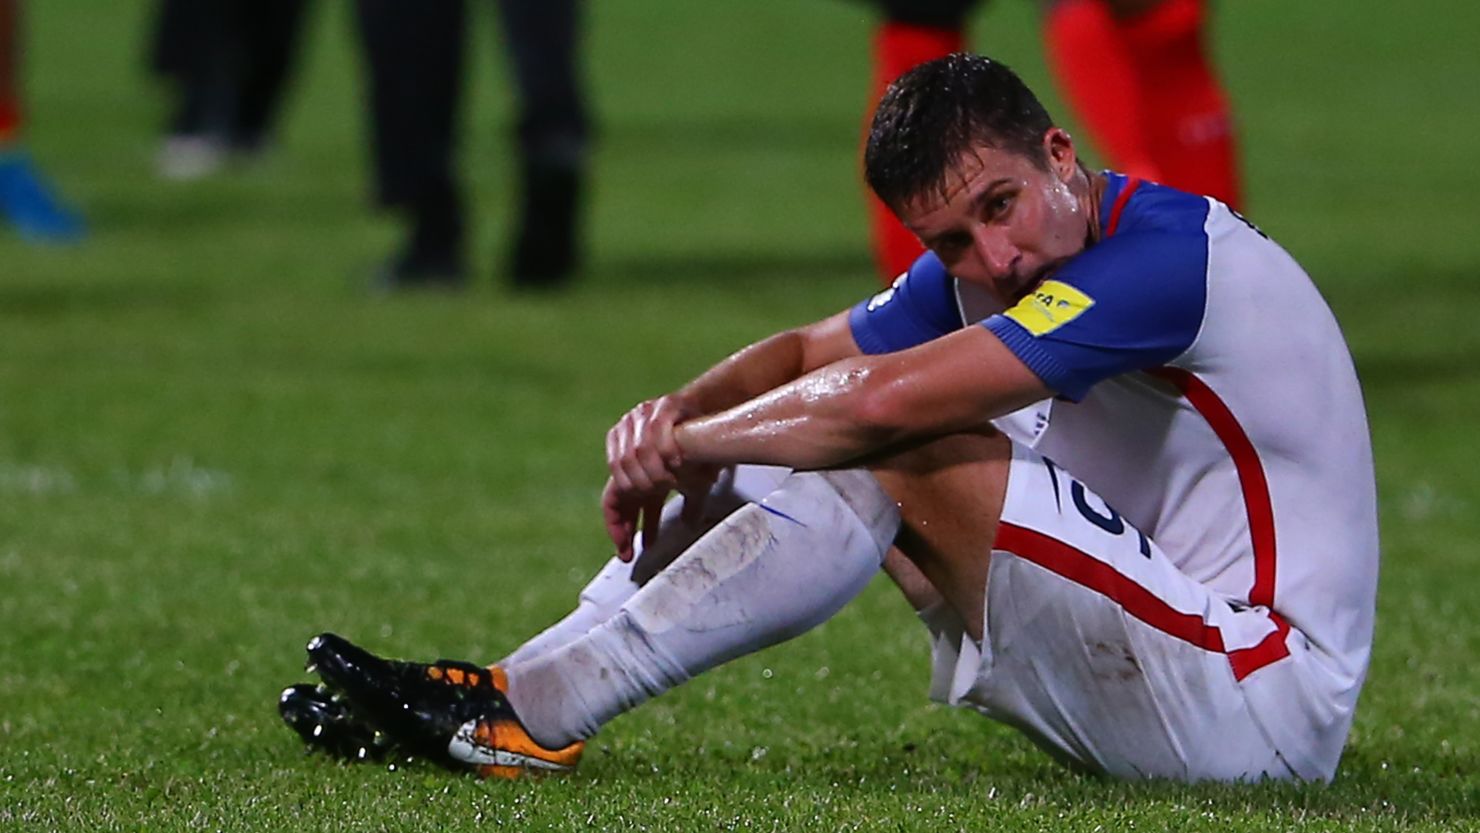 Matt Besler of the US after the team's loss to Trinidad and Tobago during the FIFA World Cup Qualifier match